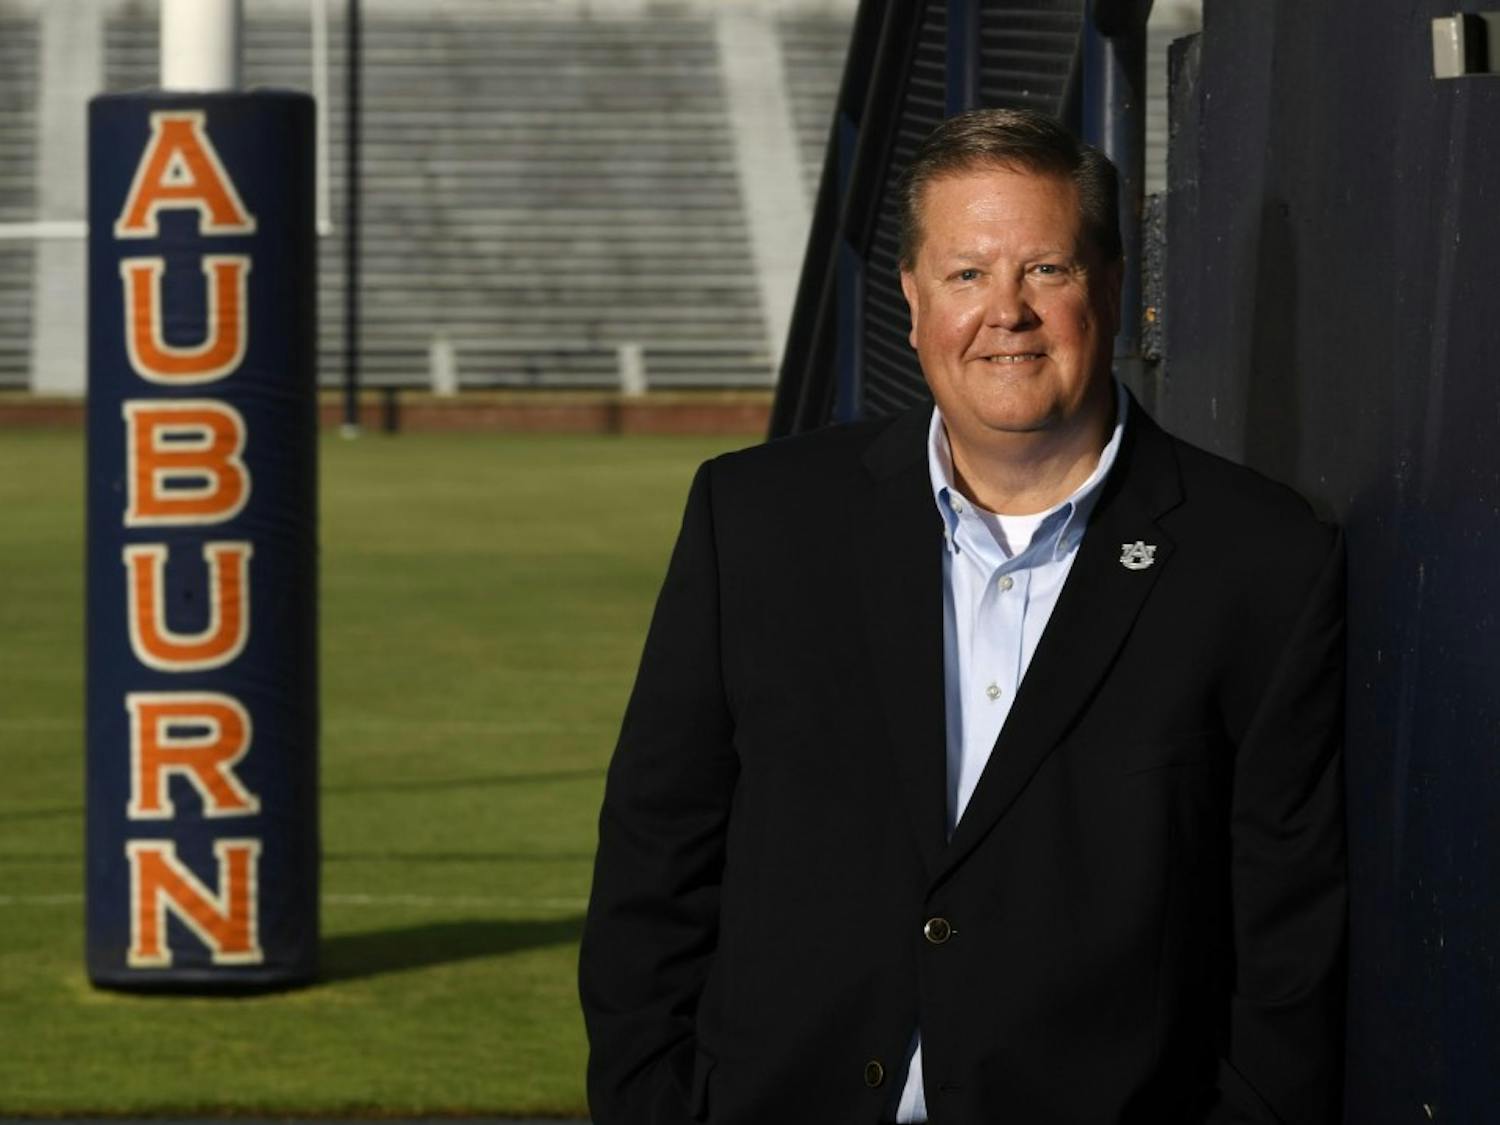 New Voice of the Auburn Tigers, Andy Burcham.